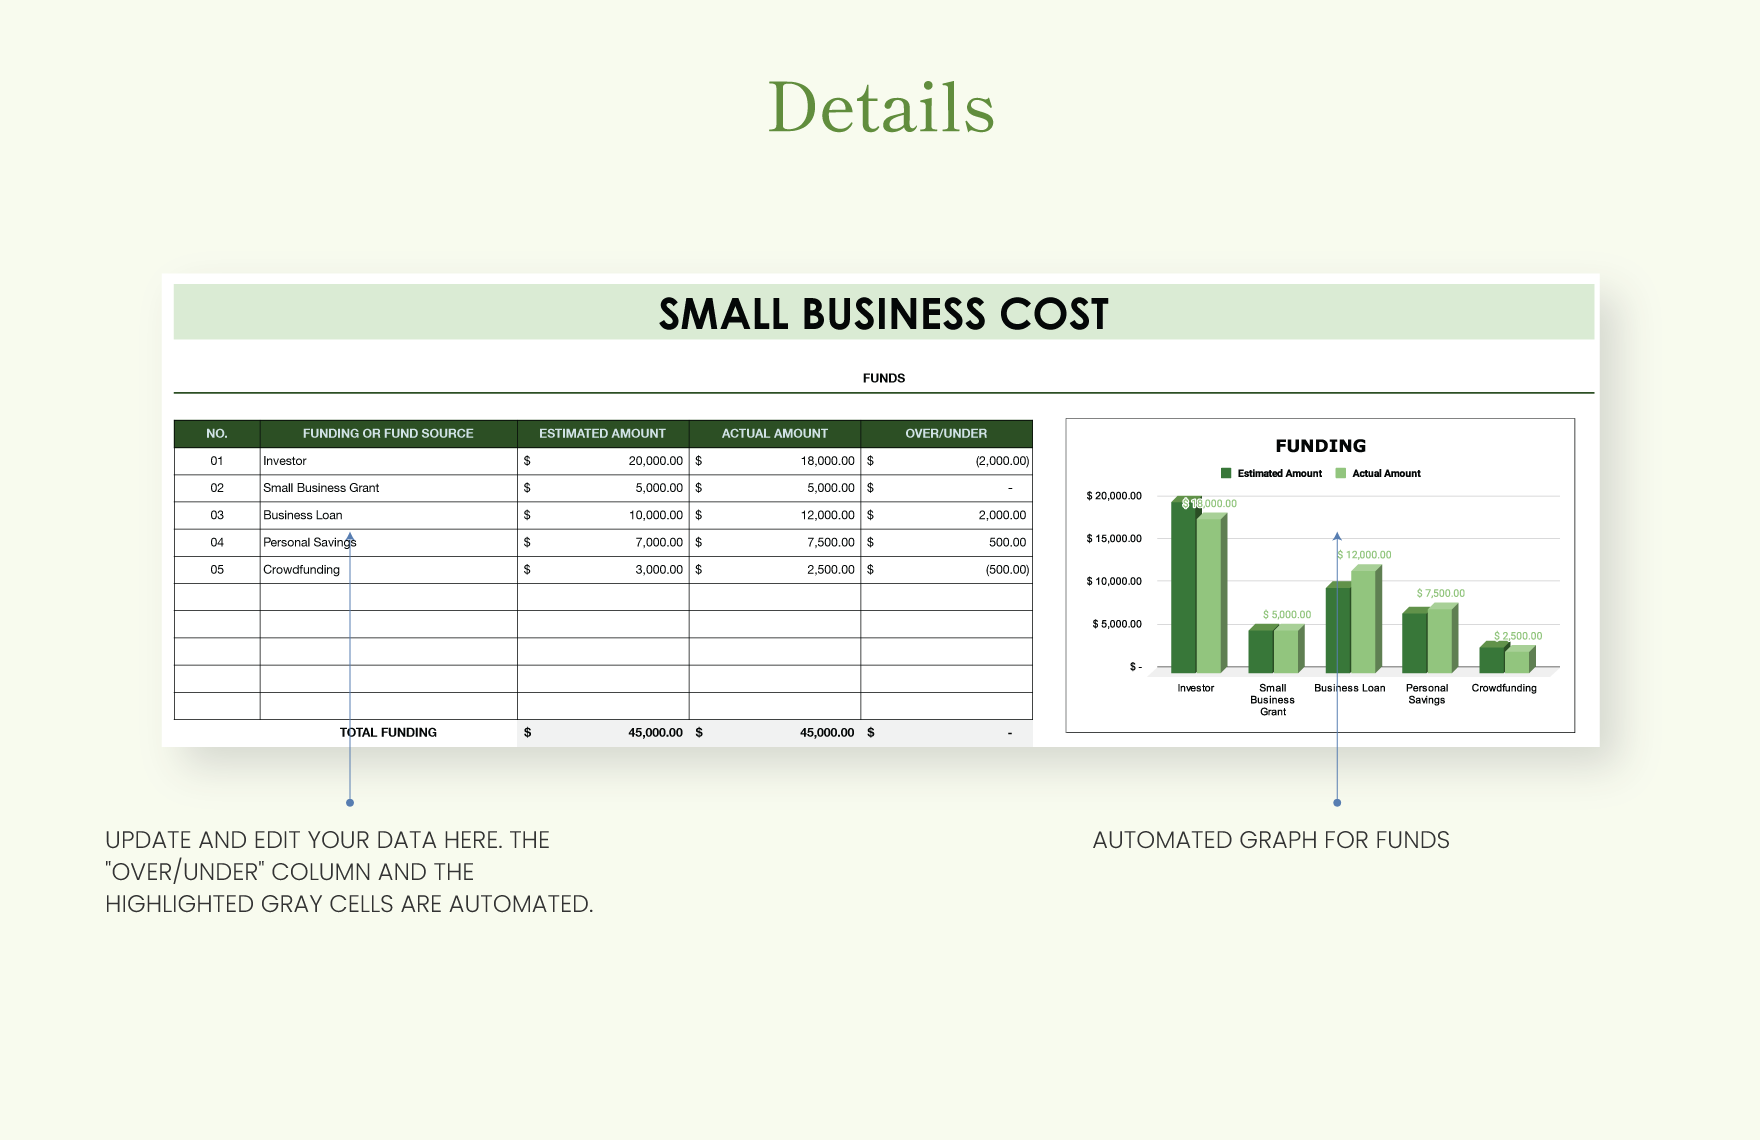 Small Business Cost Template